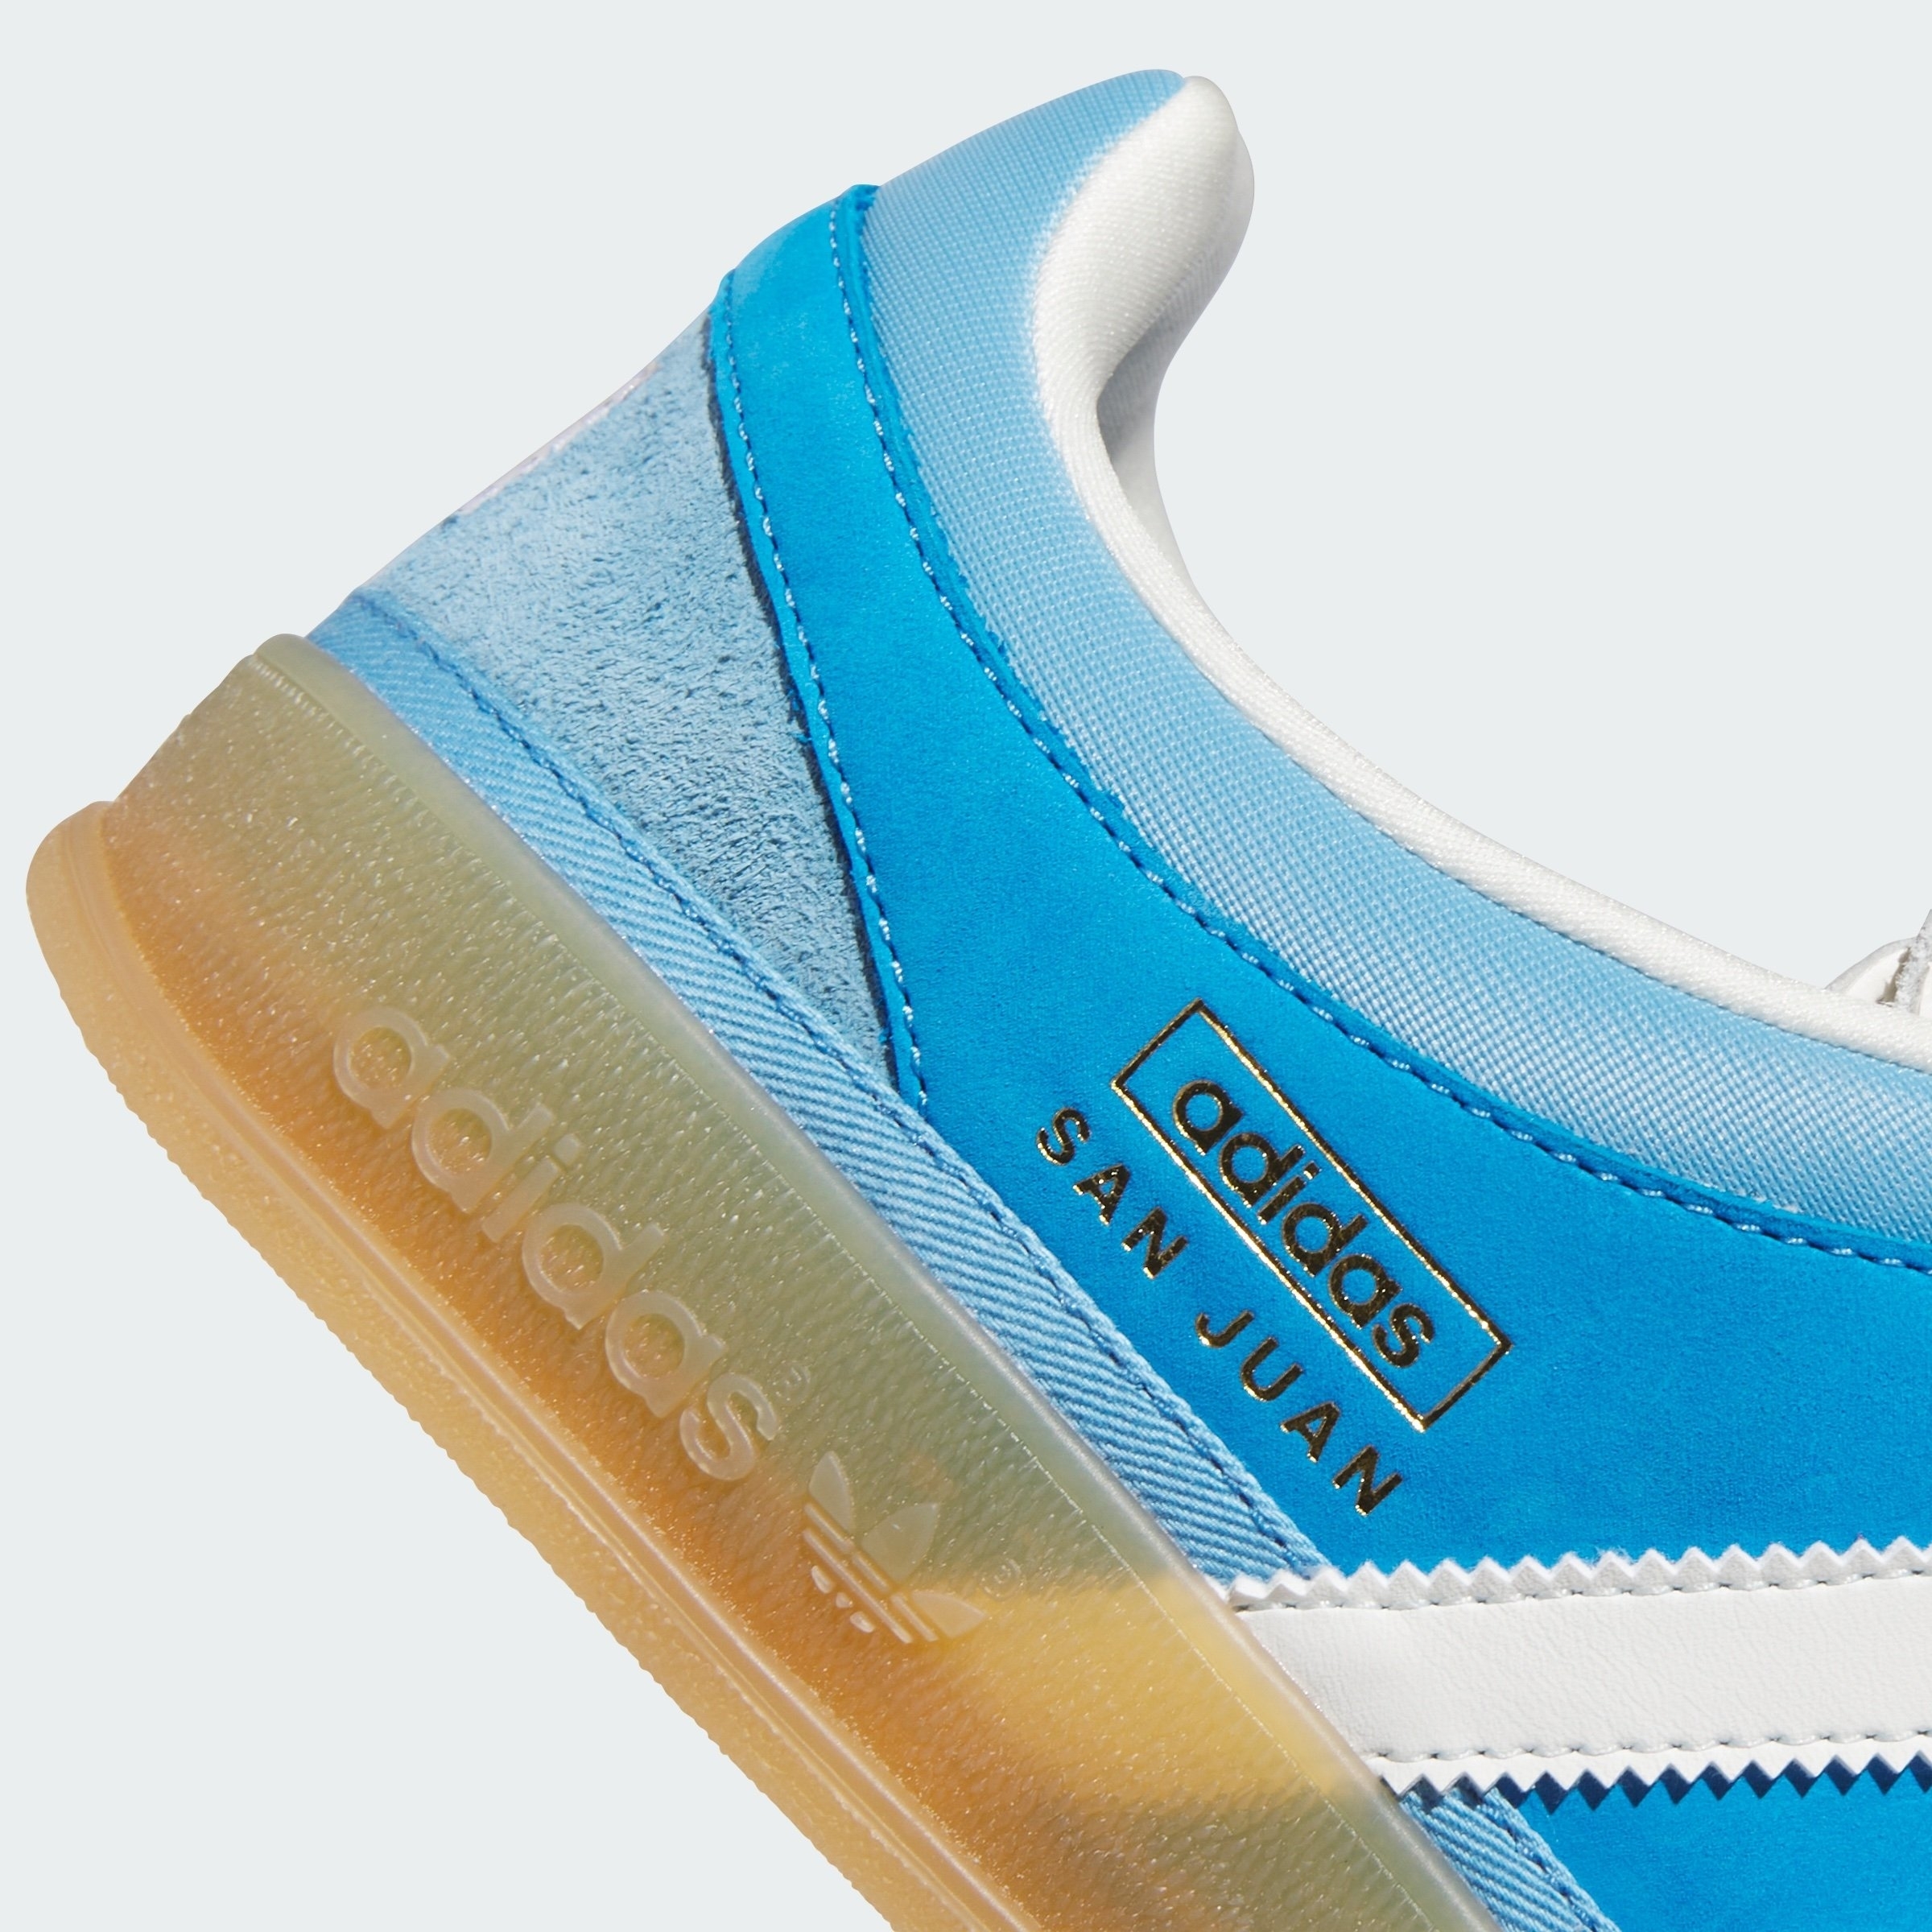 Adidas San Juan sneaker close-up, featuring a translucent sole and white stripes on the side with &quot;San Juan&quot; text